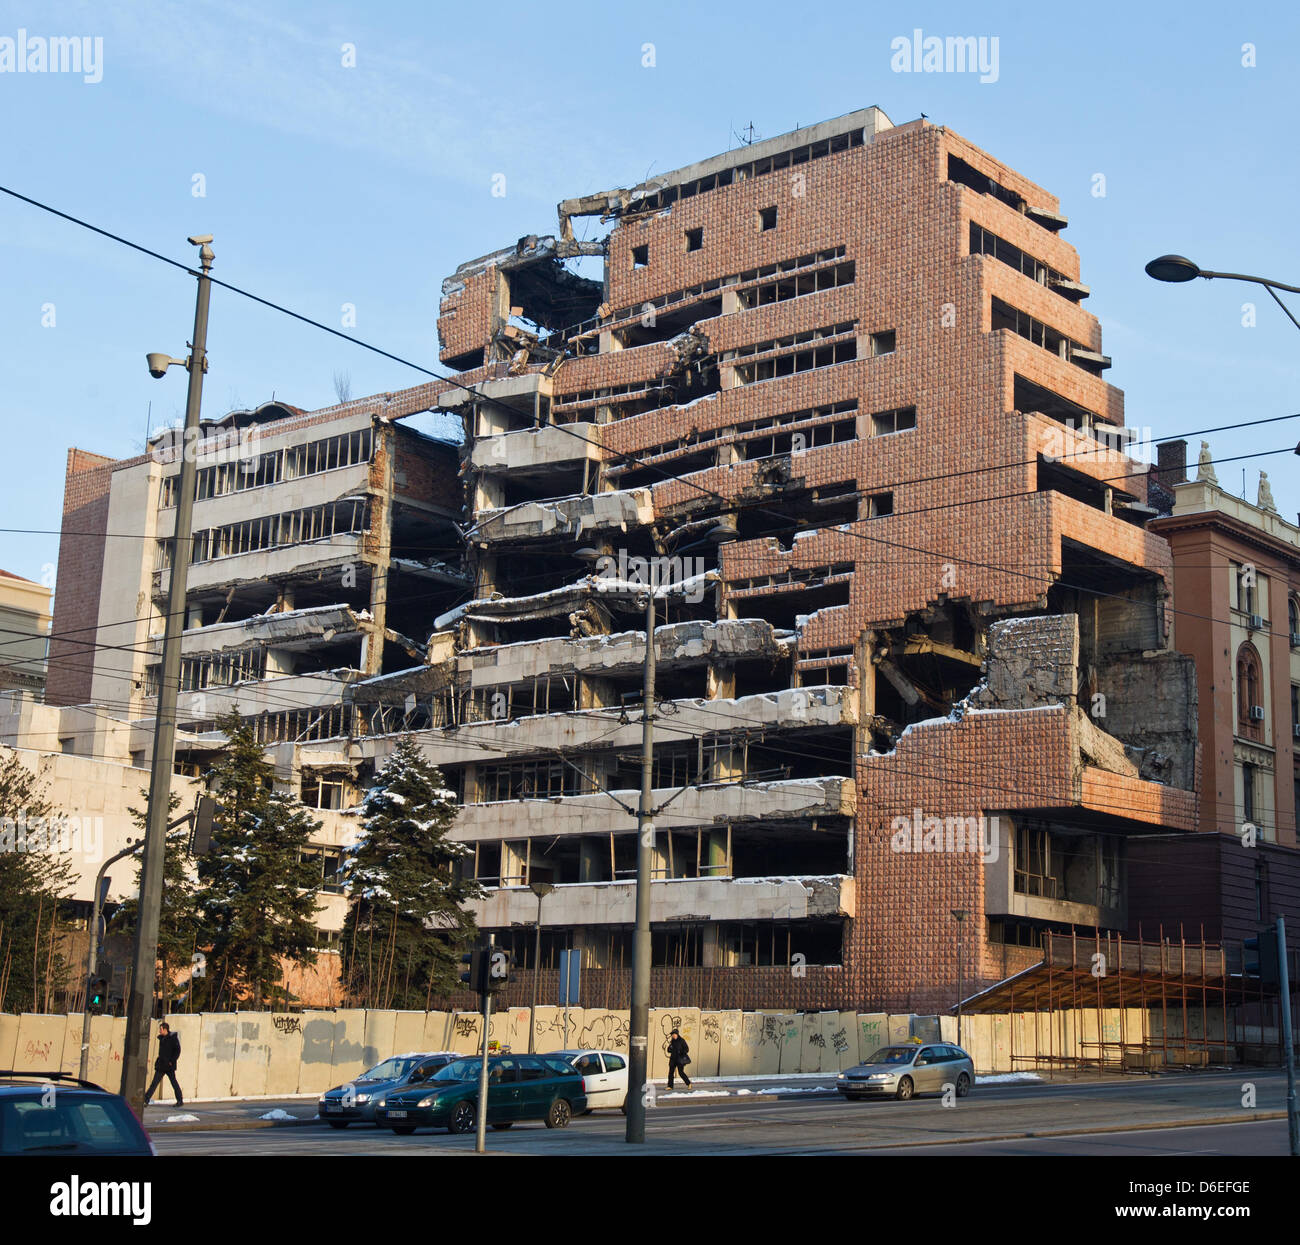 The building of the Serbian defence ministry destroyed in an NATO attack in 1999 is seen in Belgrade, Serbia, 28 January 2012. the NATO bombing caused substantial damage to the city. Among the sites bombed were the buildings of several ministries, the RTS building, which killed 16 technicians, several hospitals, the Hotel Jugoslavija, the Central Committee building, the Avala TV To Stock Photo